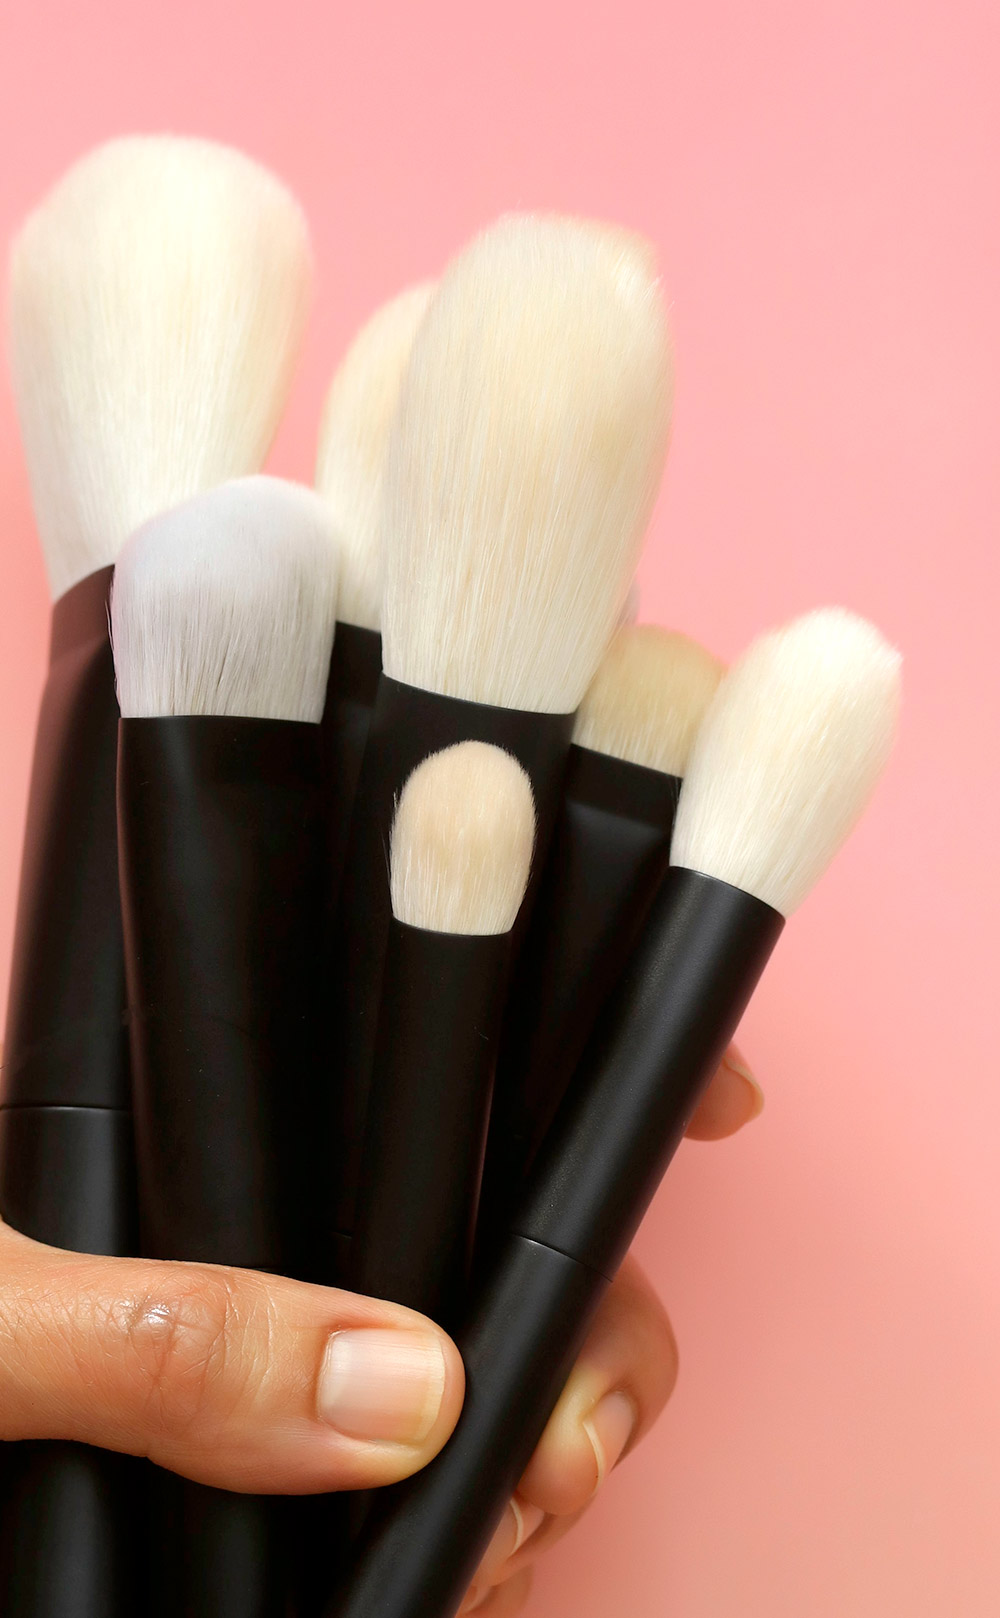 nars pro brush collection in hand